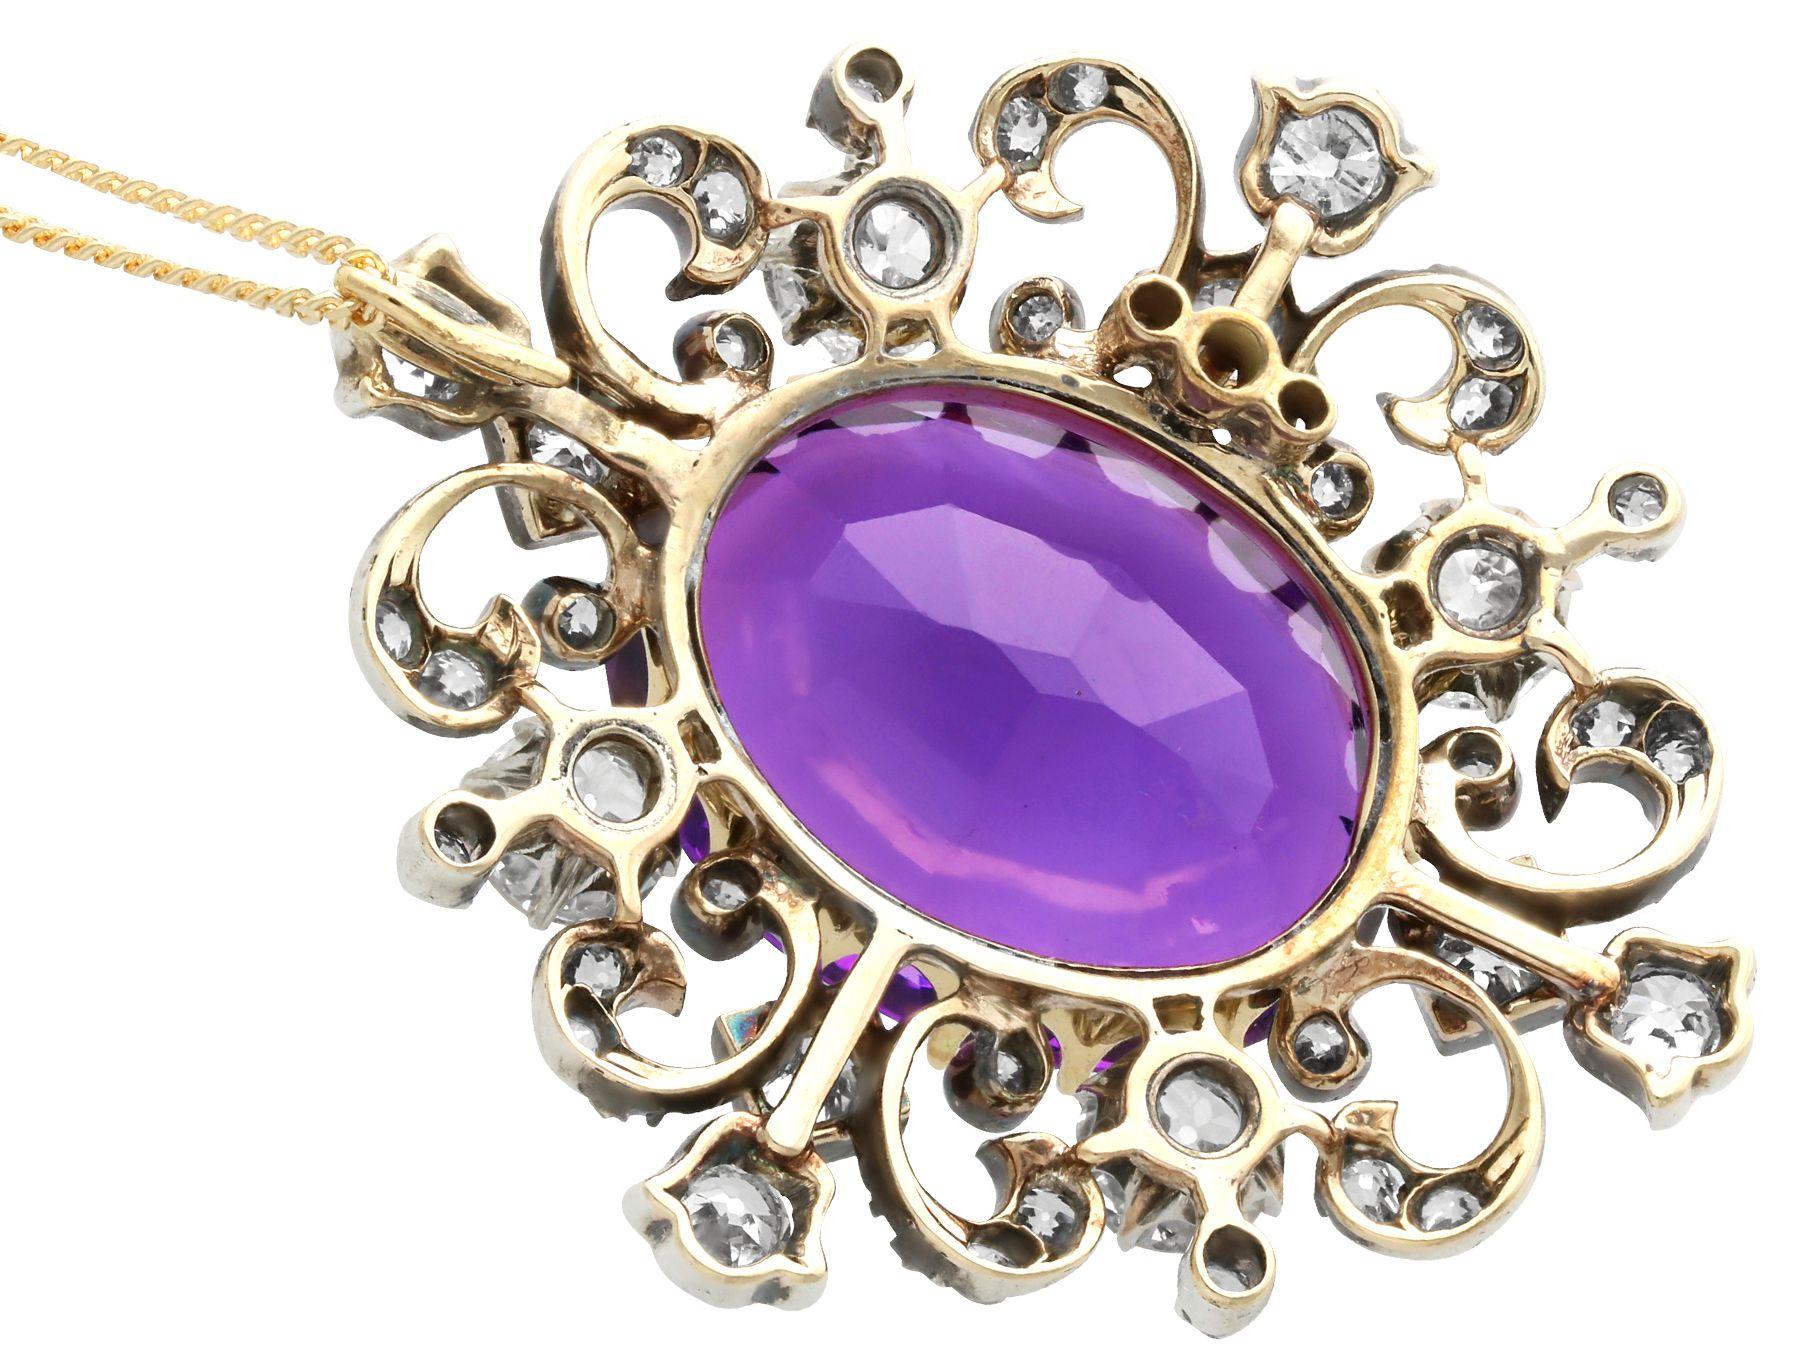 Women's or Men's Antique 18.25ct Amethyst and 4.43ct Diamond 9k Yellow Gold Brooch / Pendant